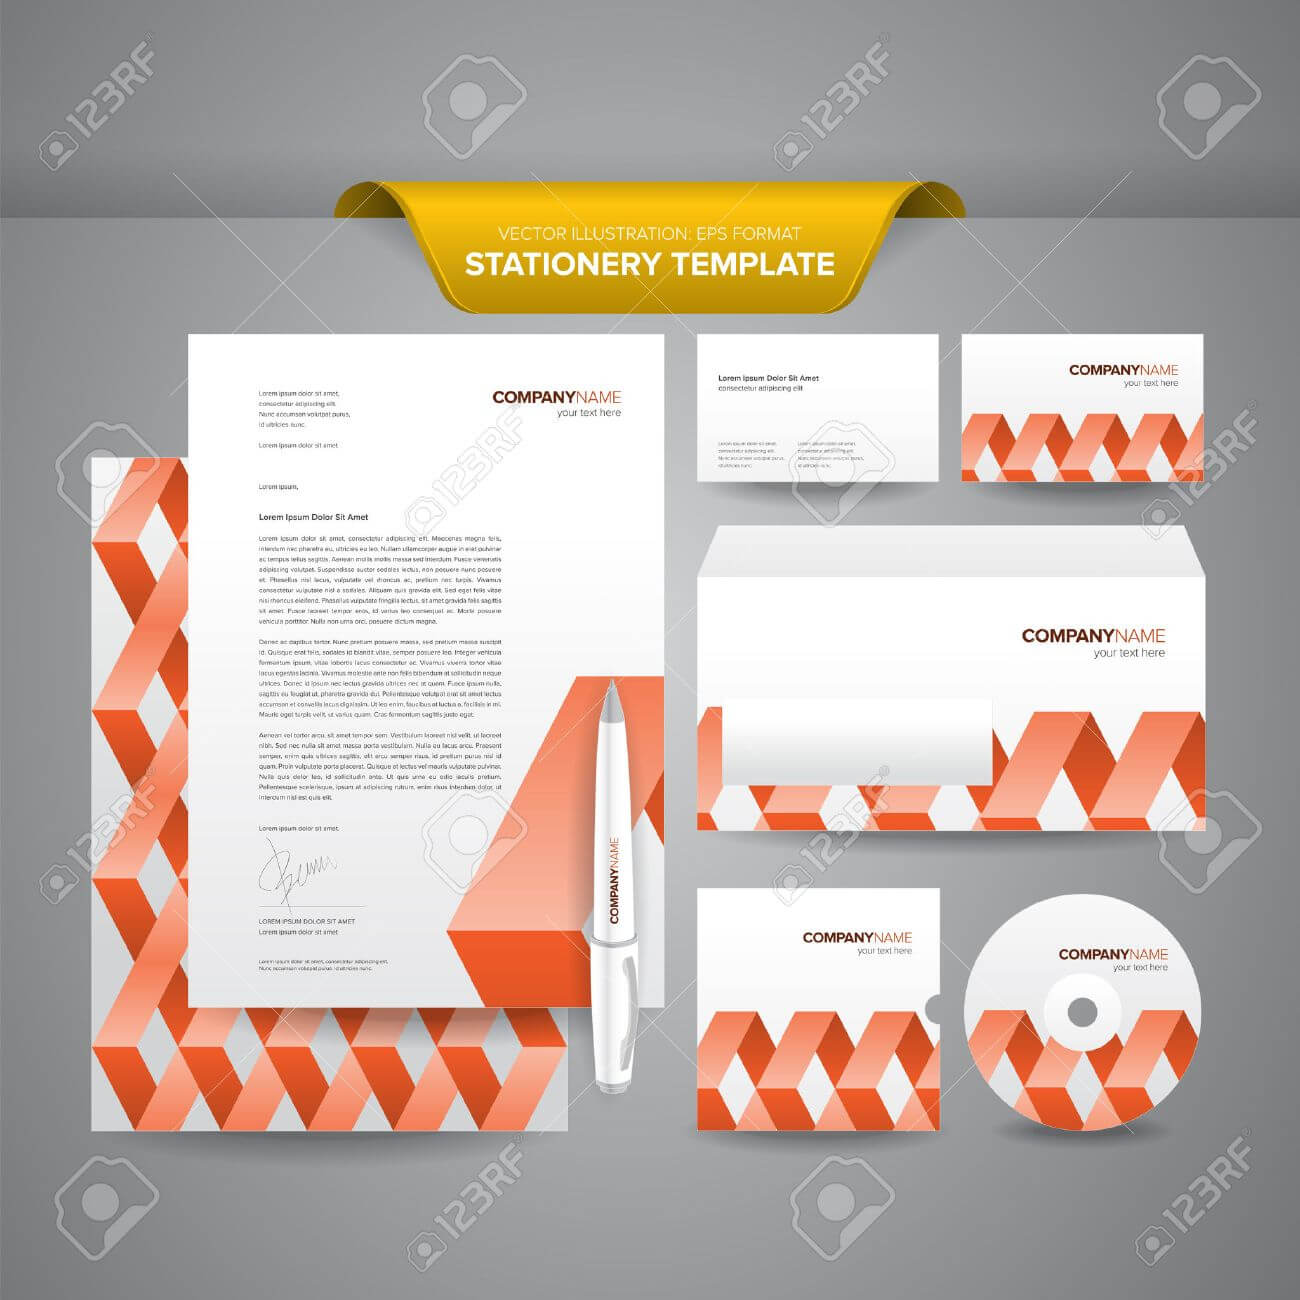 complete-set-of-business-stationery-templates-such-as-letterhead-in